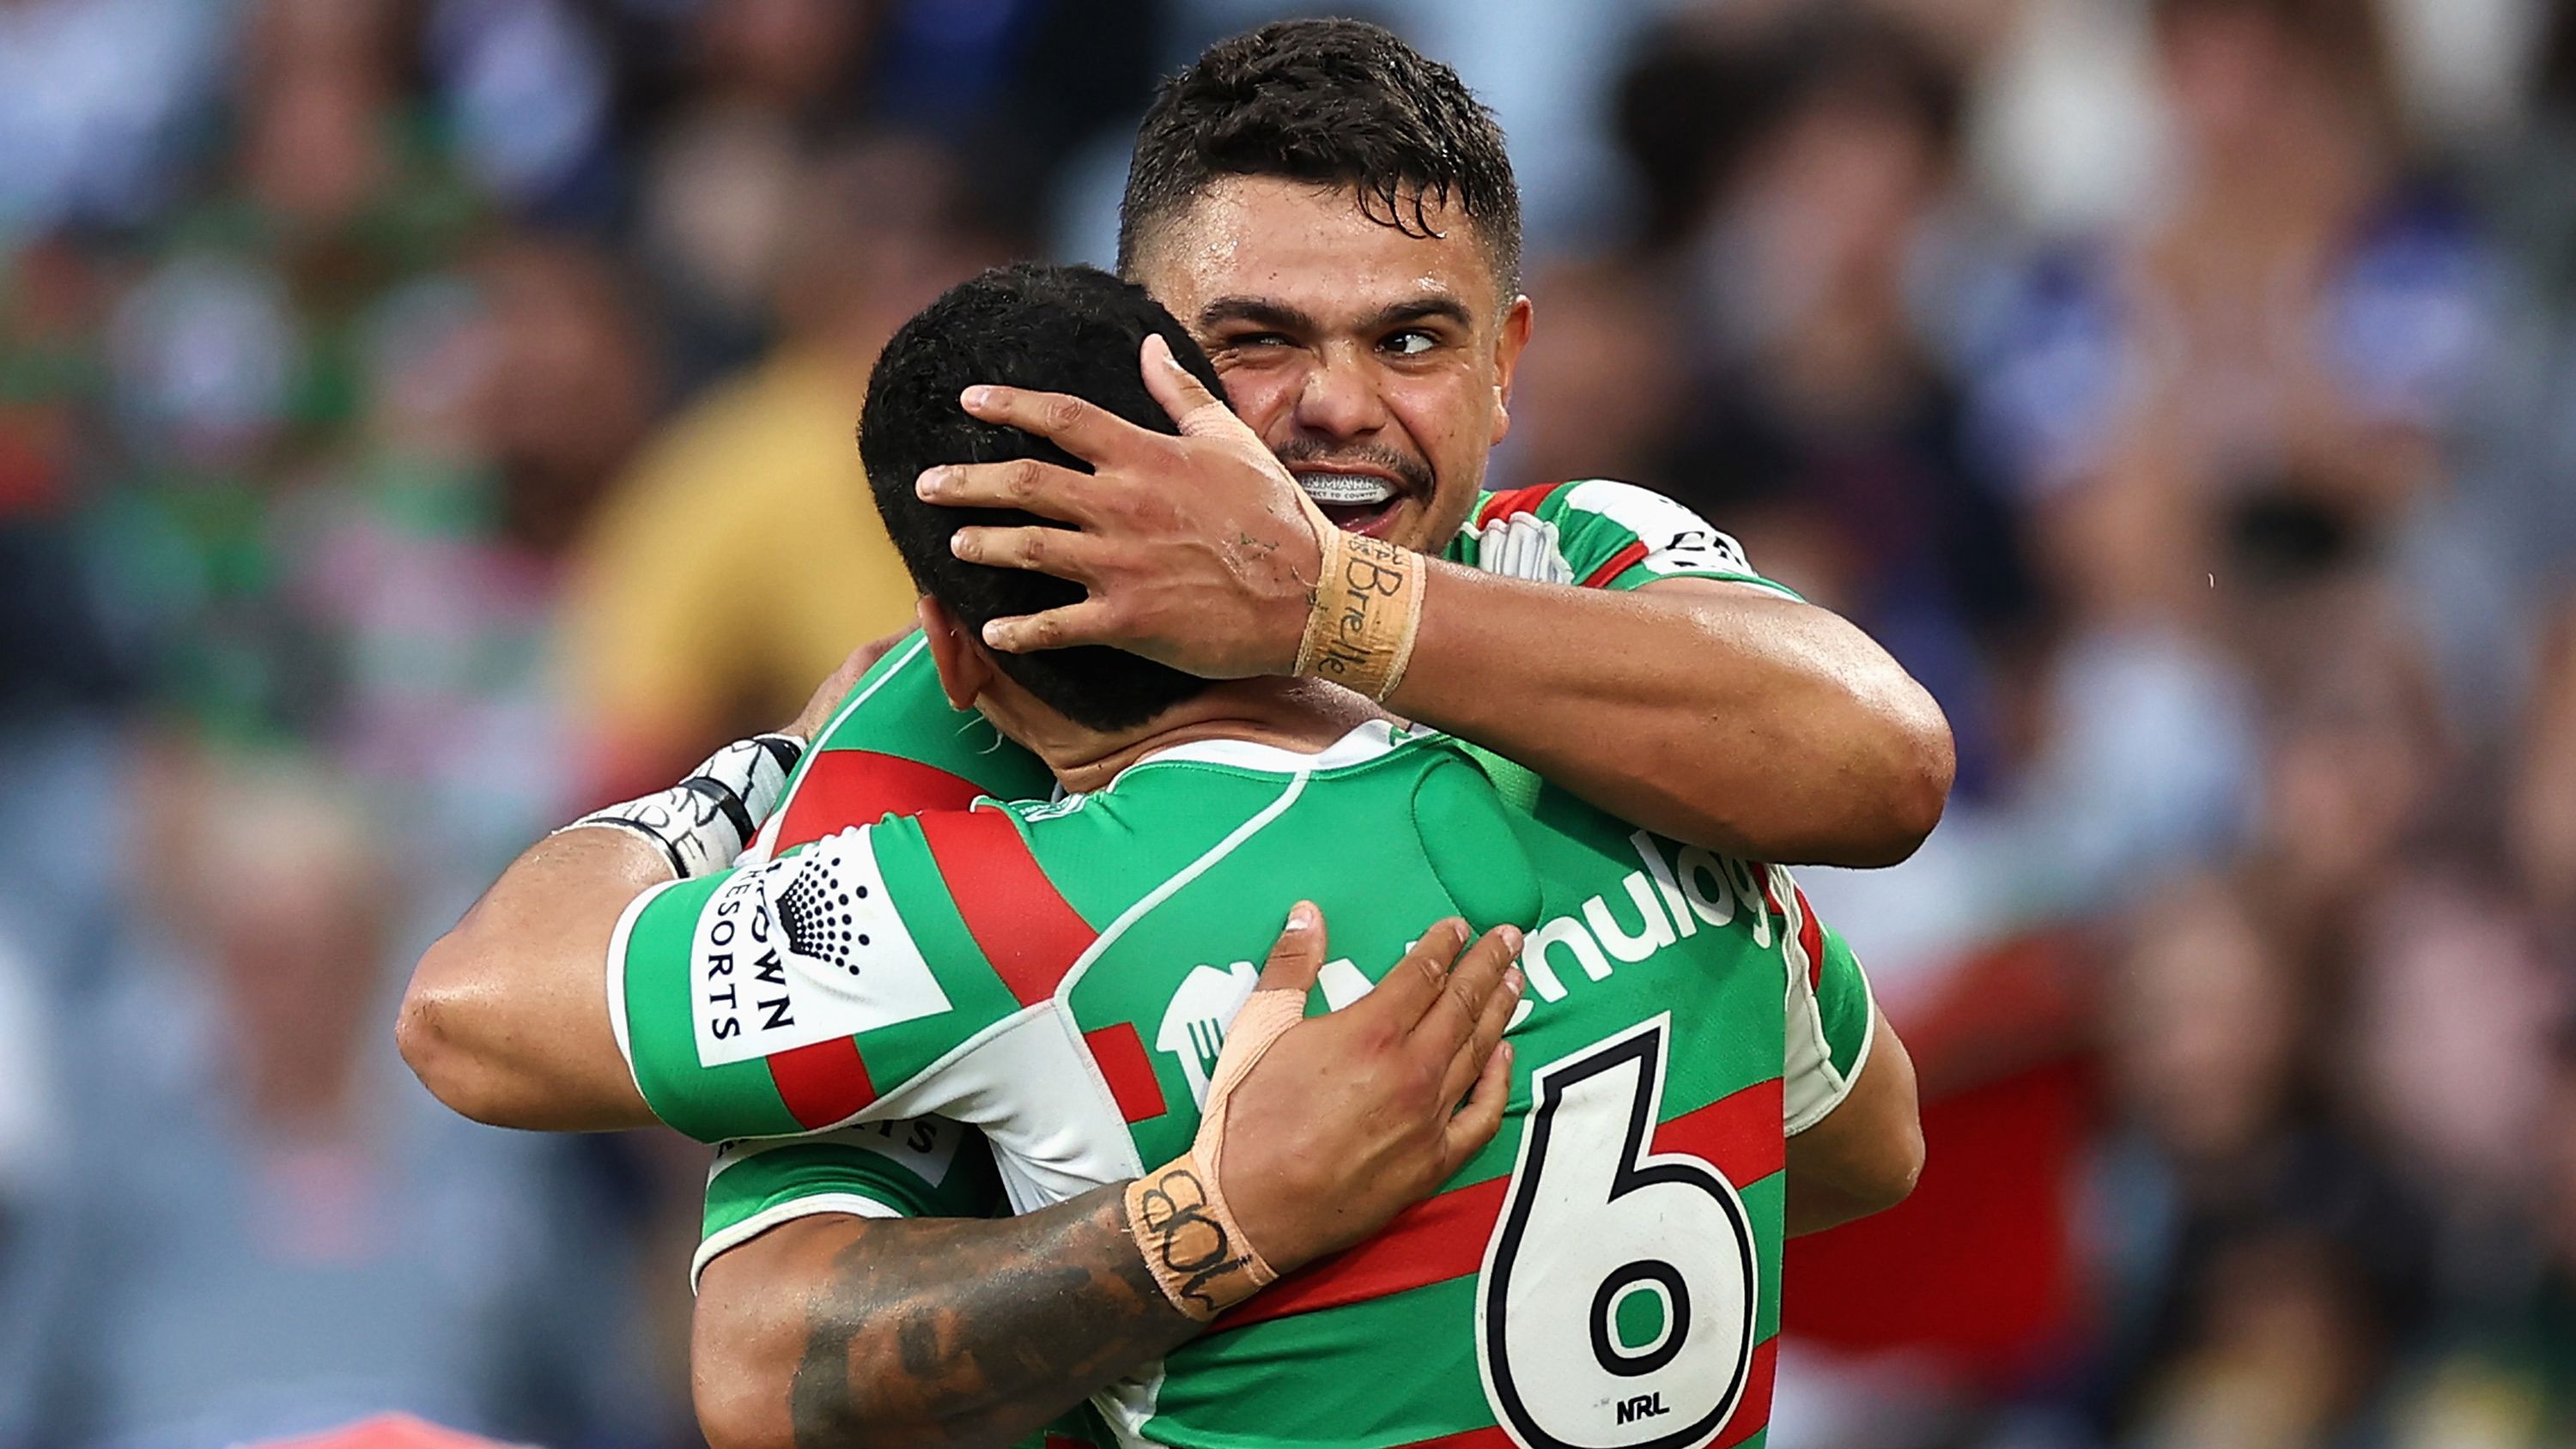 NRL teams round 22: Latrell Mitchell to make long-awaited return from calf injury to boost Rabbitohs' finals hopes